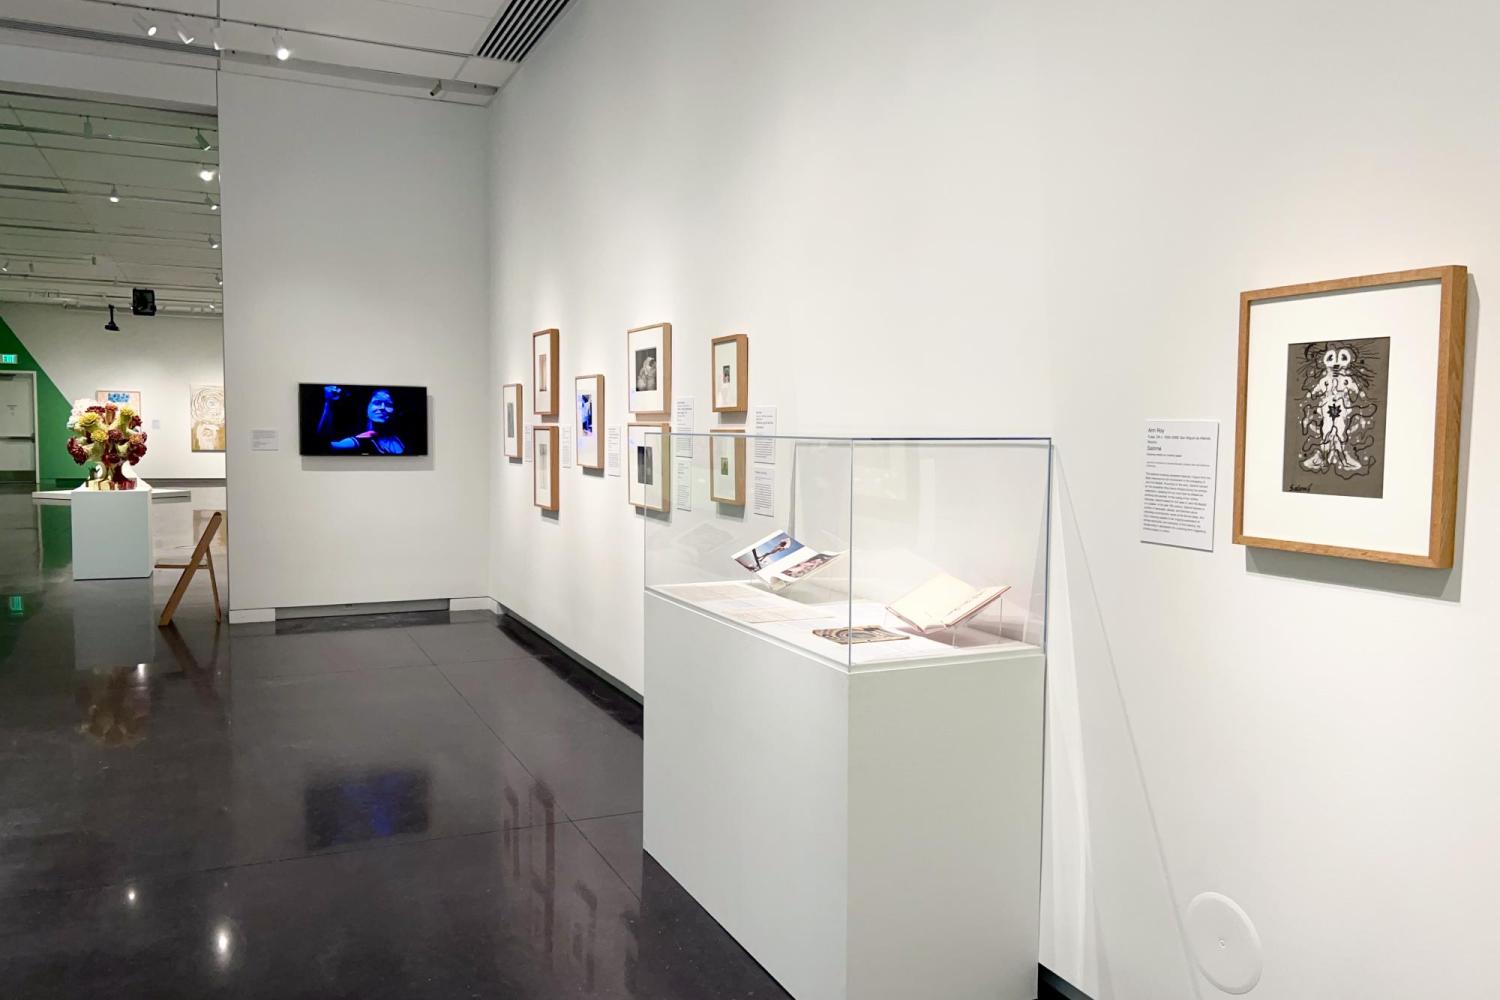 A photo of the inside of the CU Art Museum, featuring a wall with many framed artworks, a TV screen mounted on the wall, and a pedestal with artwork inside.